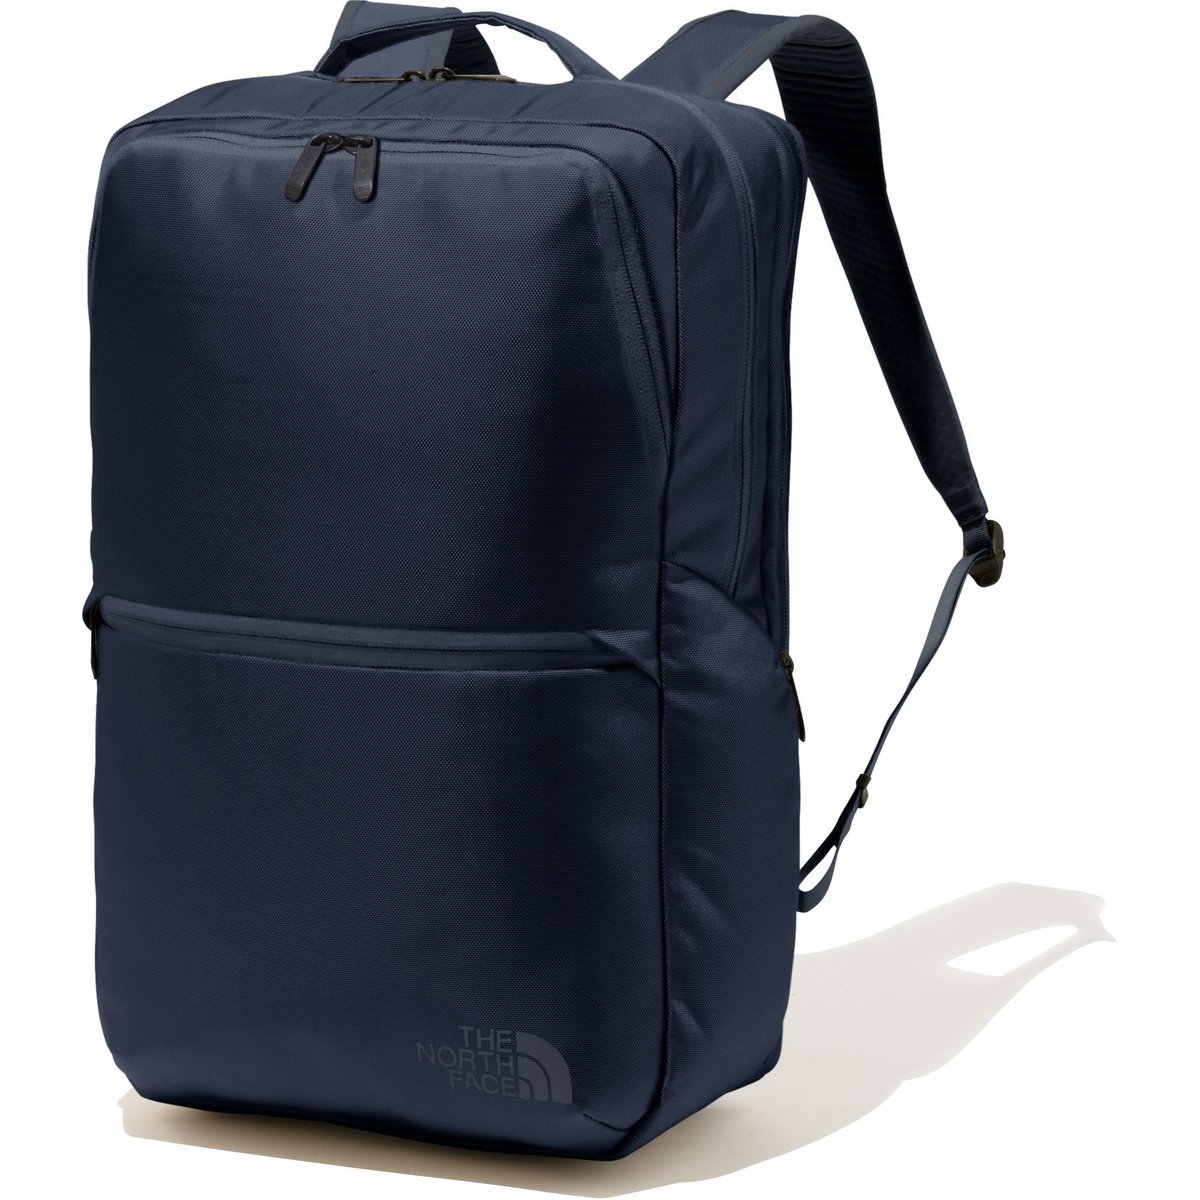 THE NORTH FACE Shuttle Daypack / NM82329 / ザノー...